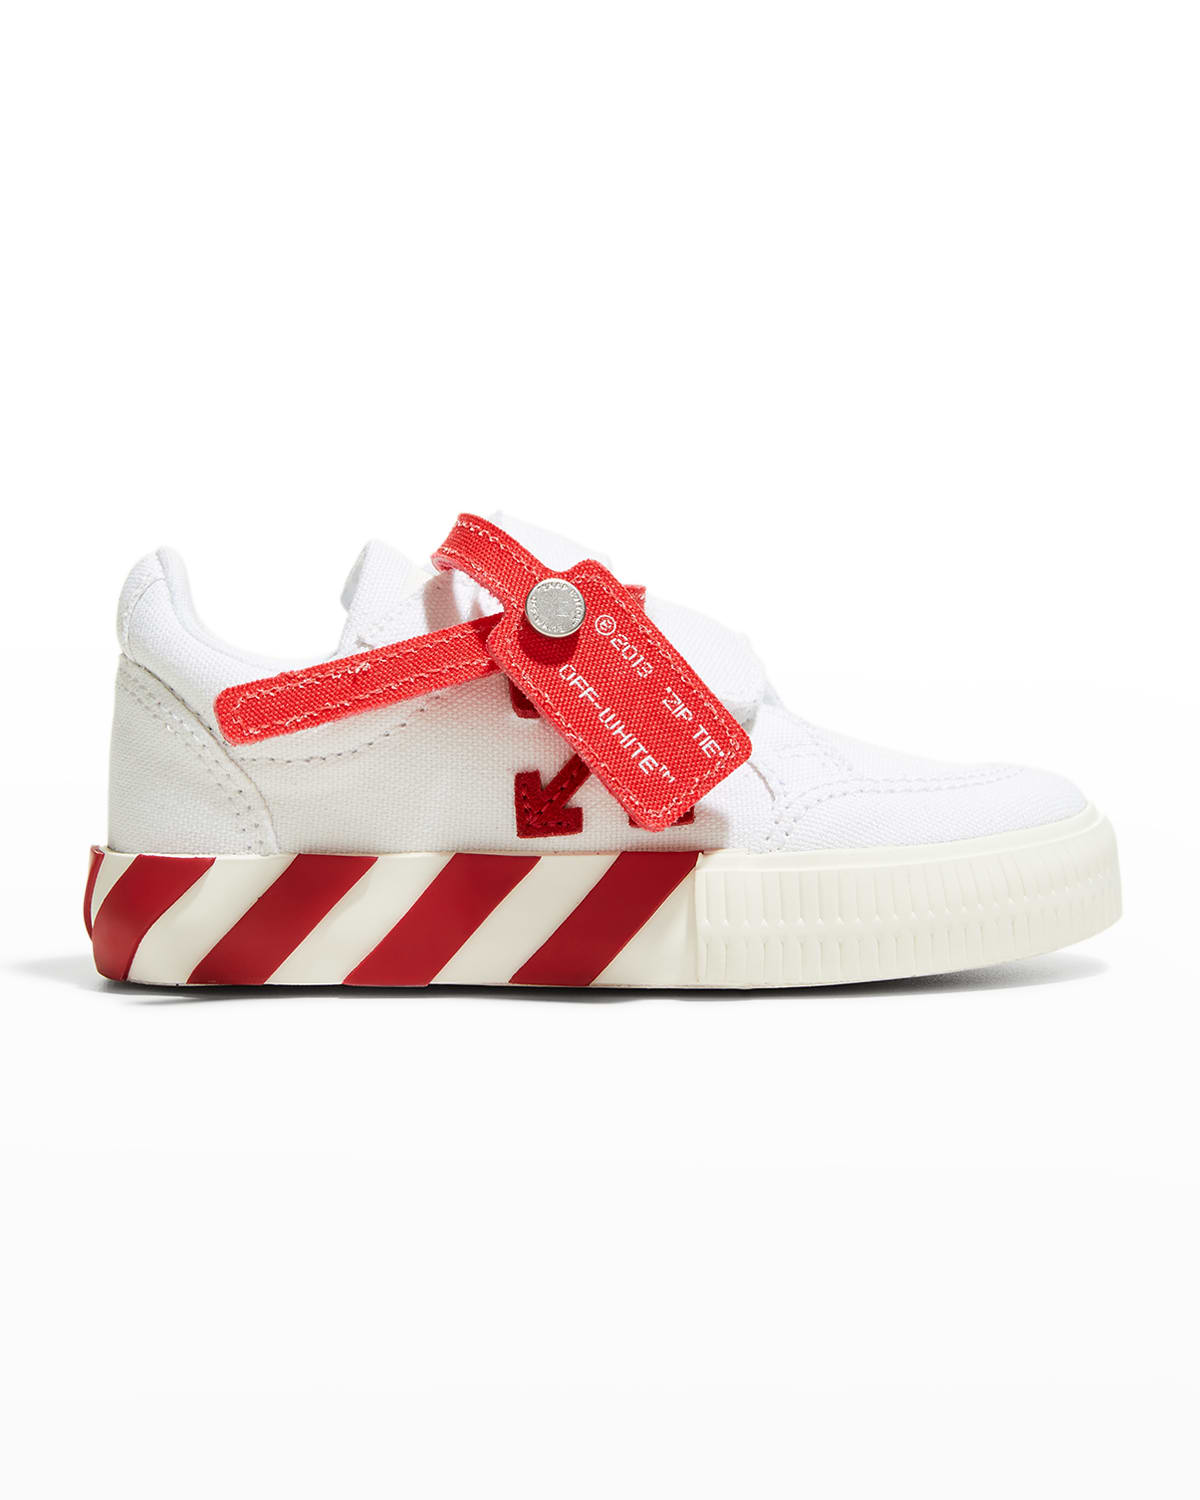 Off-white Kid's Arrow Canvas Grip-strap Low-top Sneakers, Toddler/kids In White/red